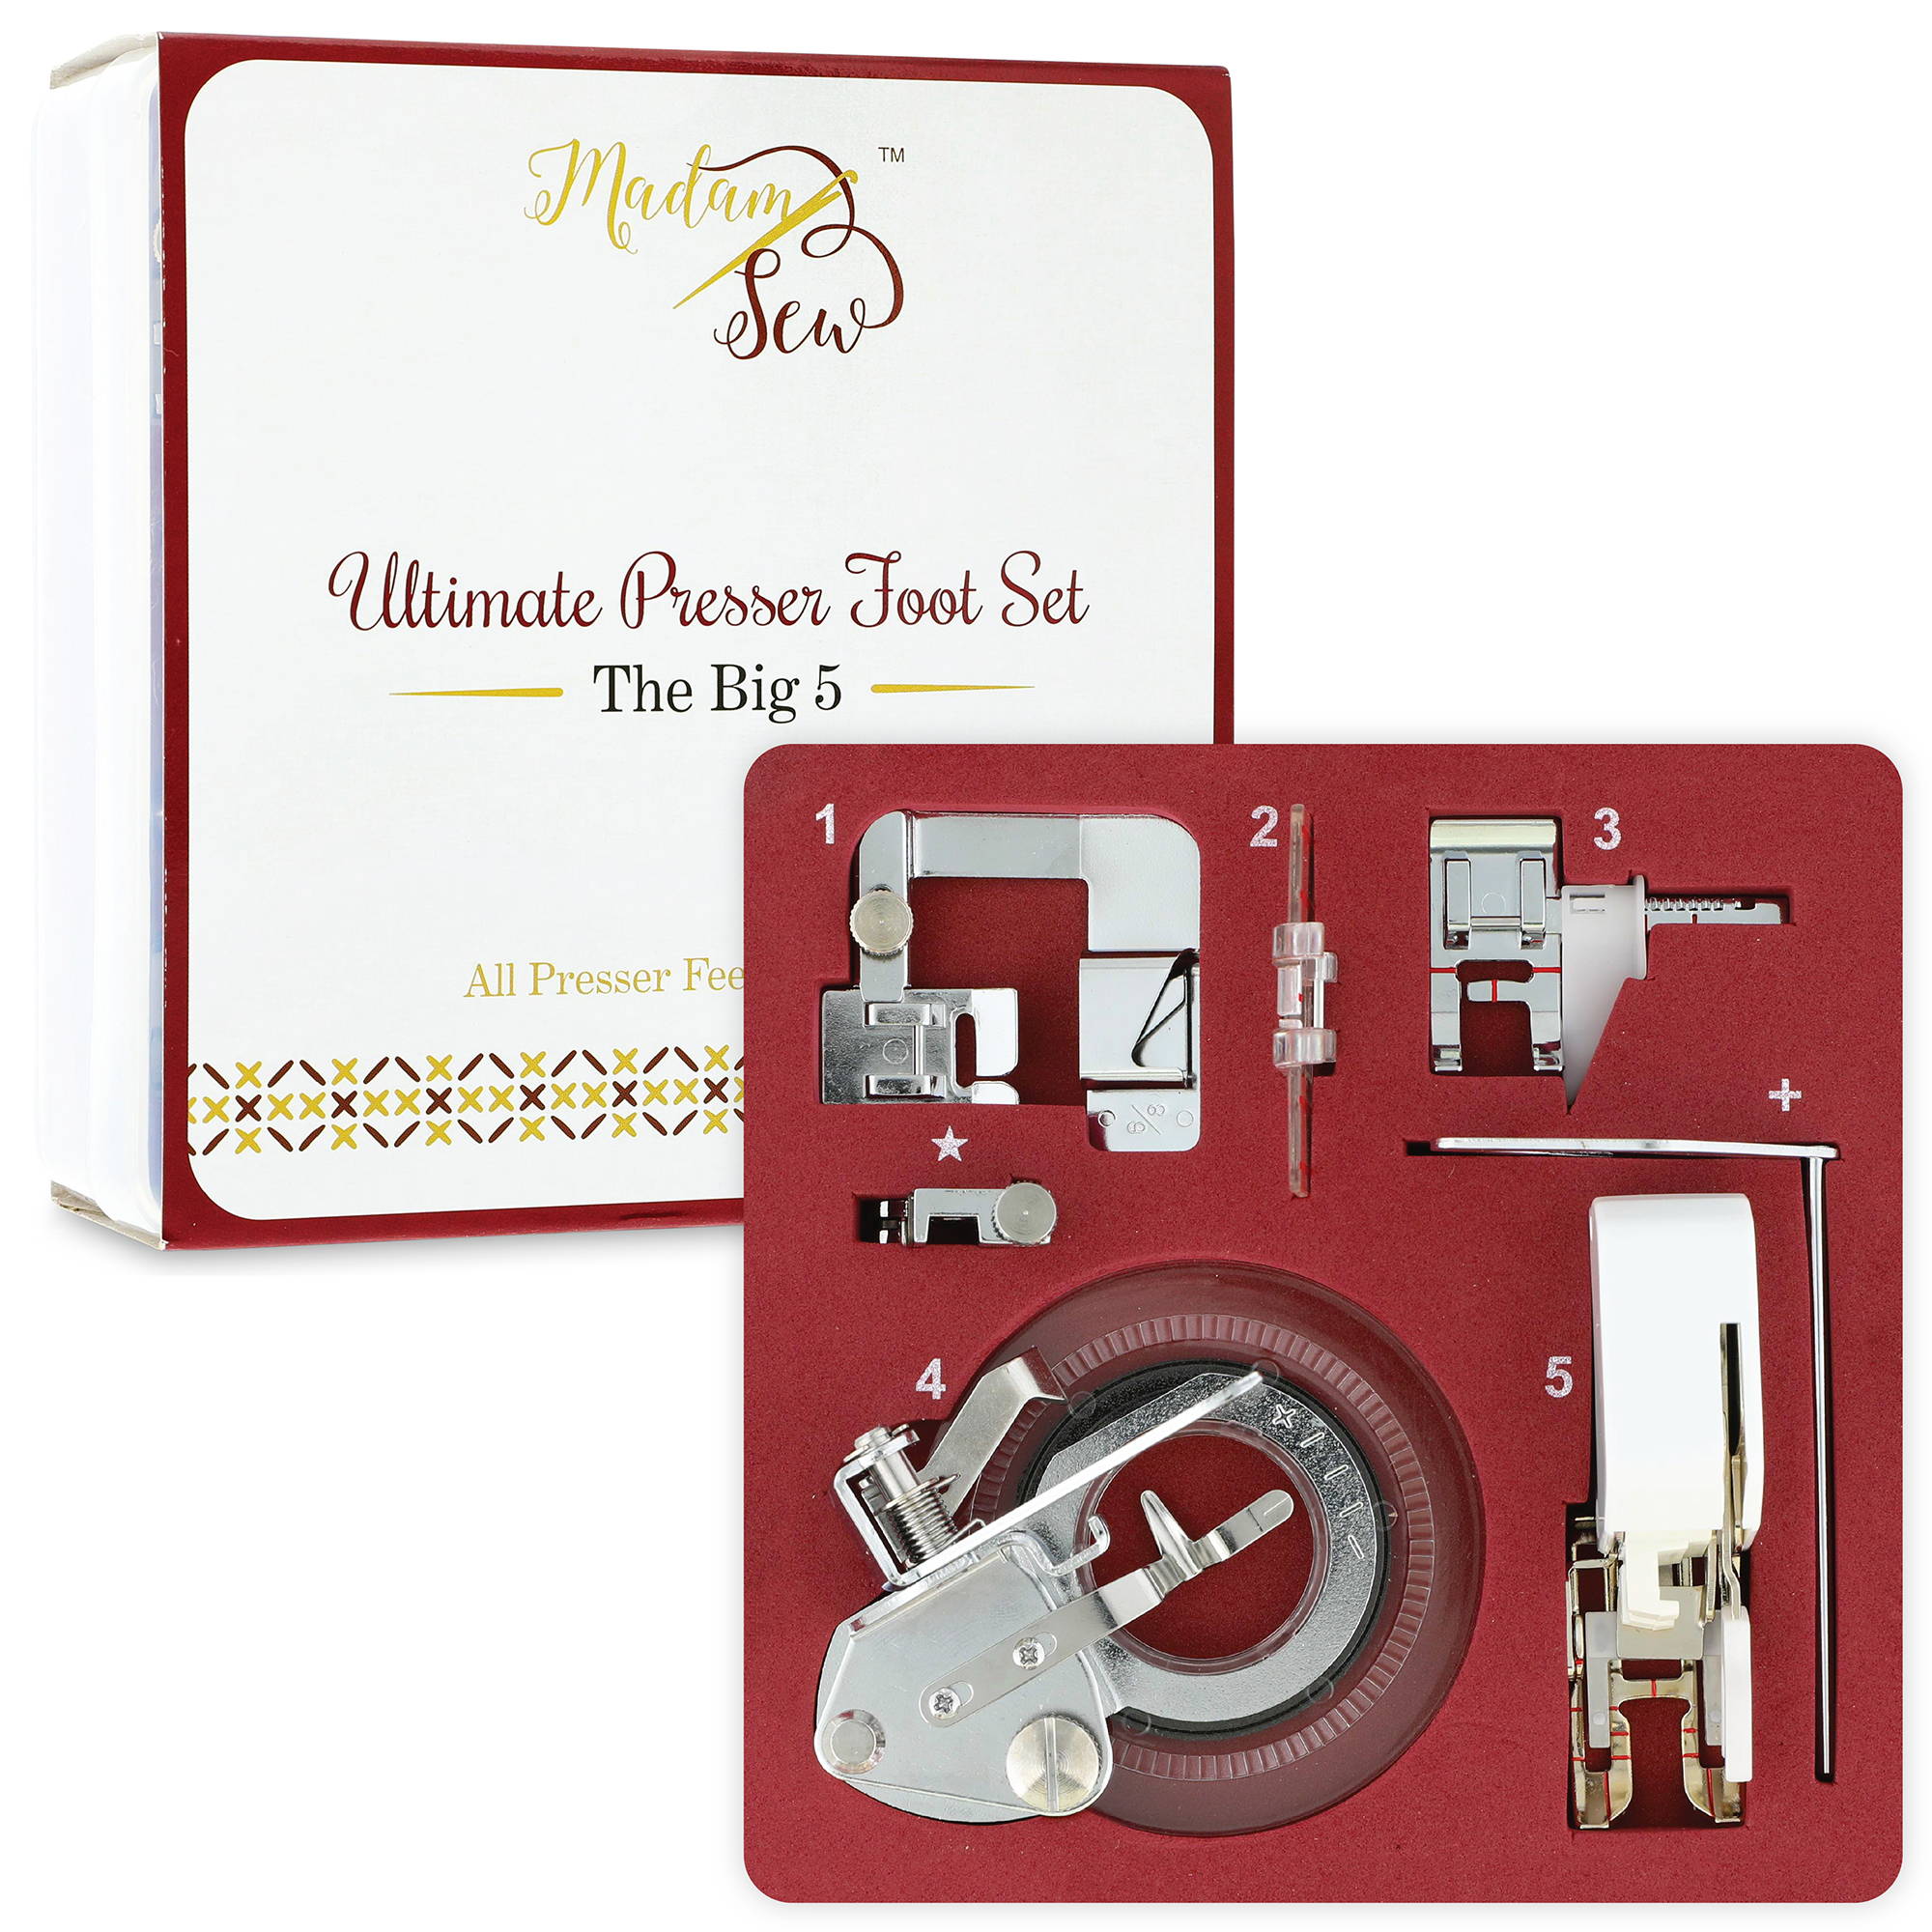 Sew Straight with These Presser Feet and Seam Guides – MadamSew